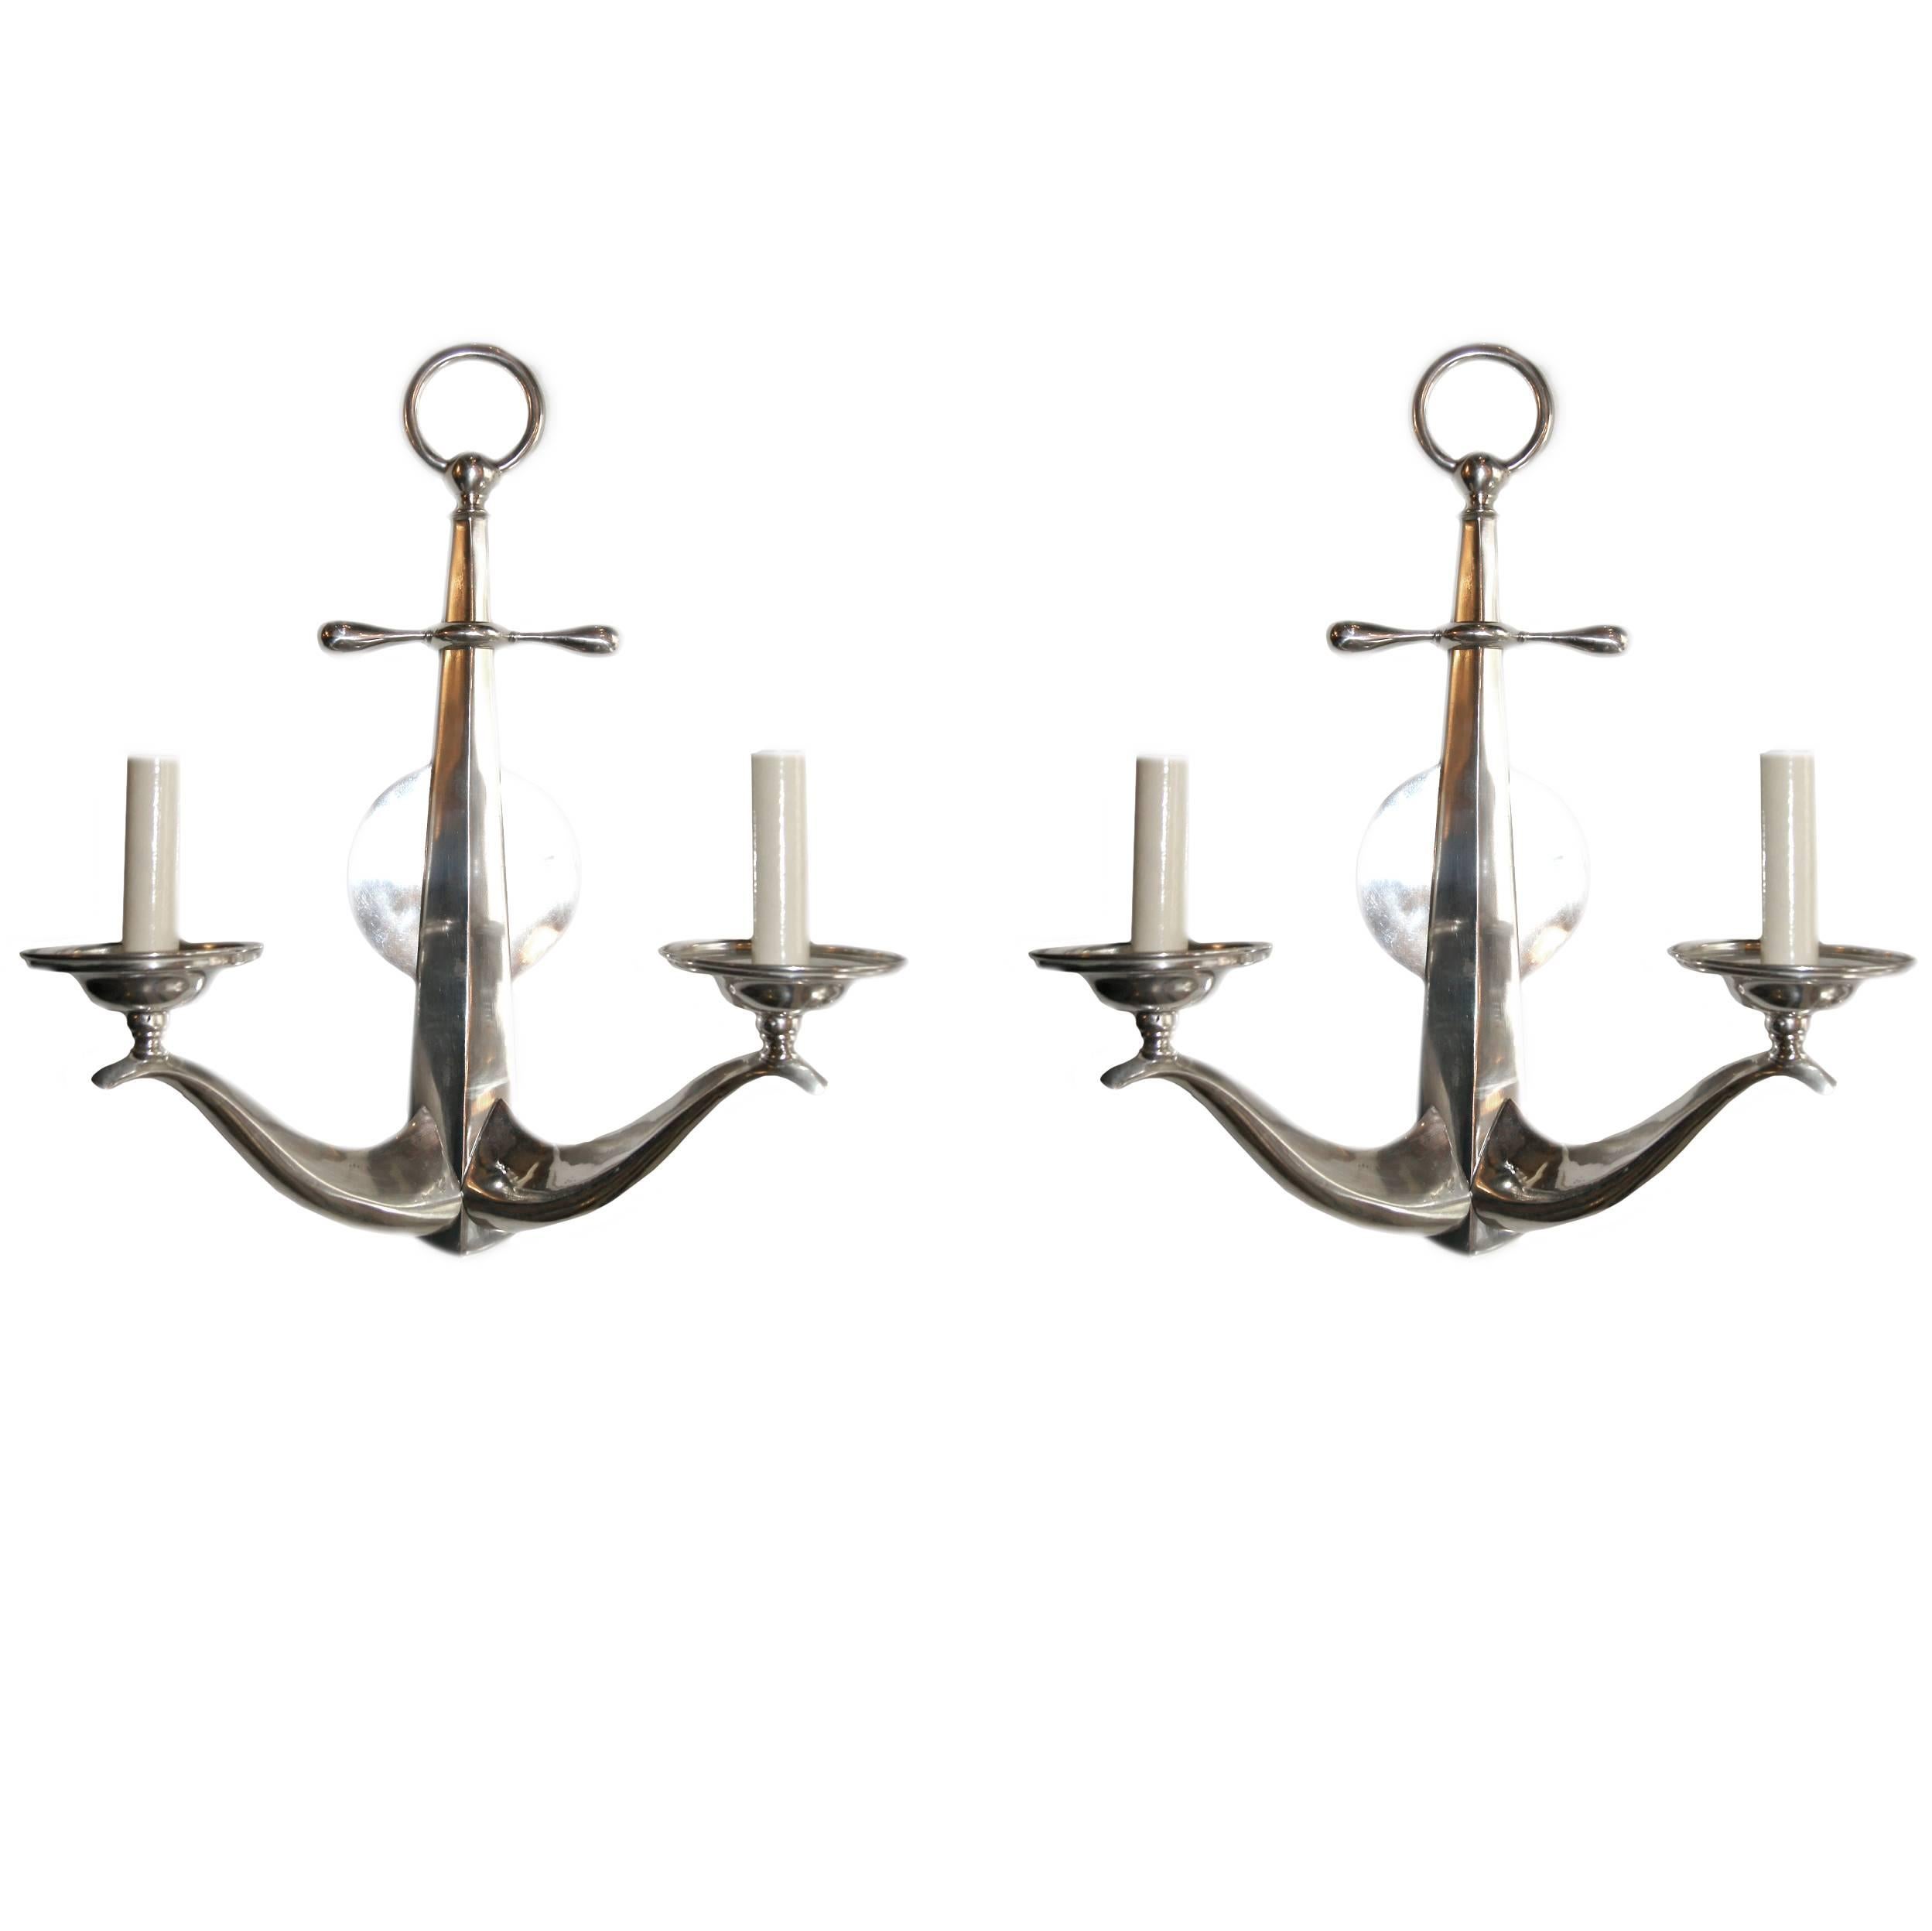 Set of Silver Plated Anchor Sconces, Sold in Pairs